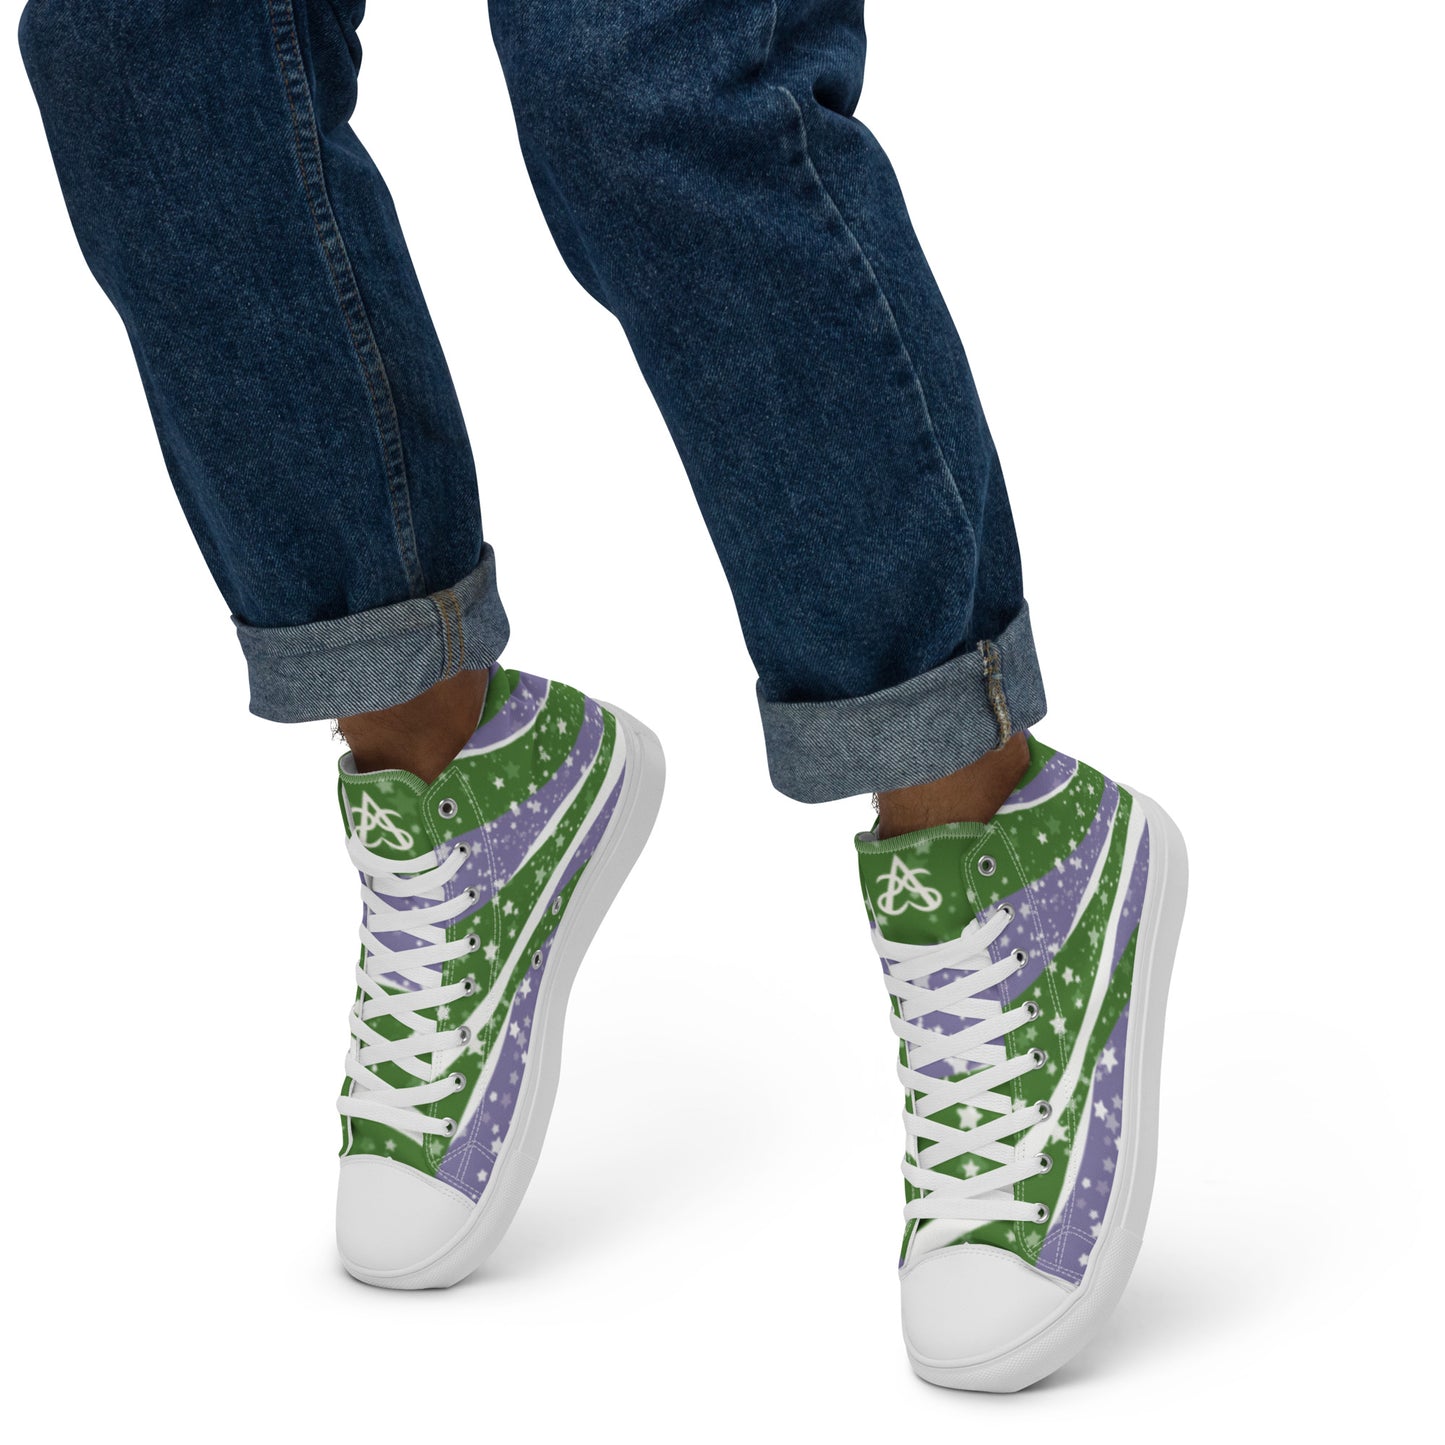 A model wears a pair of high top shoes with green, purple, and white ribbons that get larger from heel to laces, white stars, and the Aras Sivad logo on the tongue.